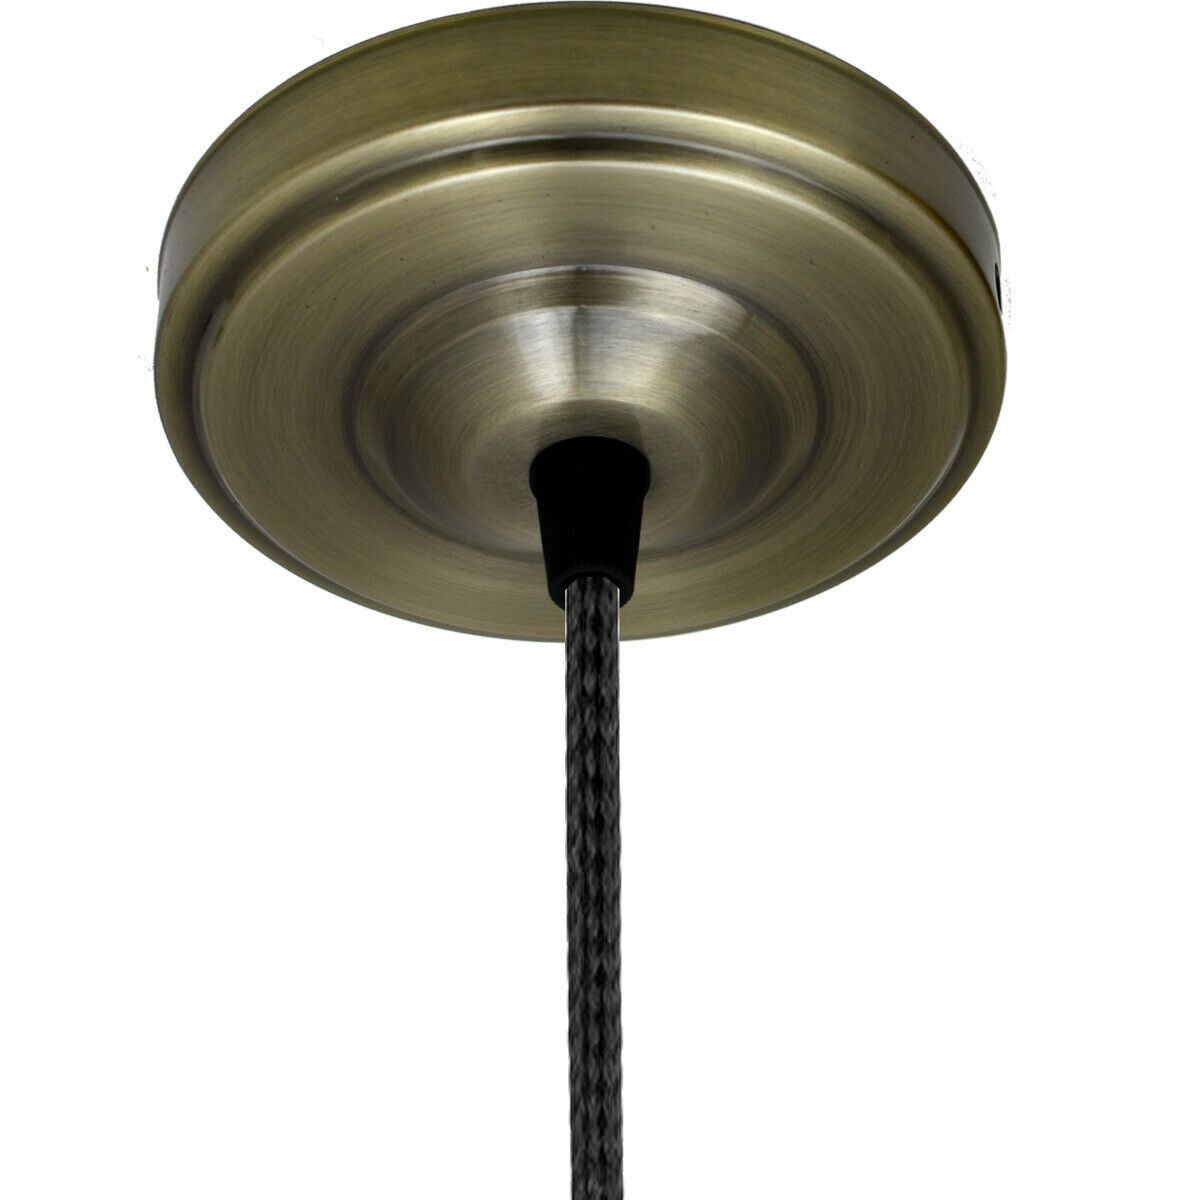 Single Outlet Ceiling Rose